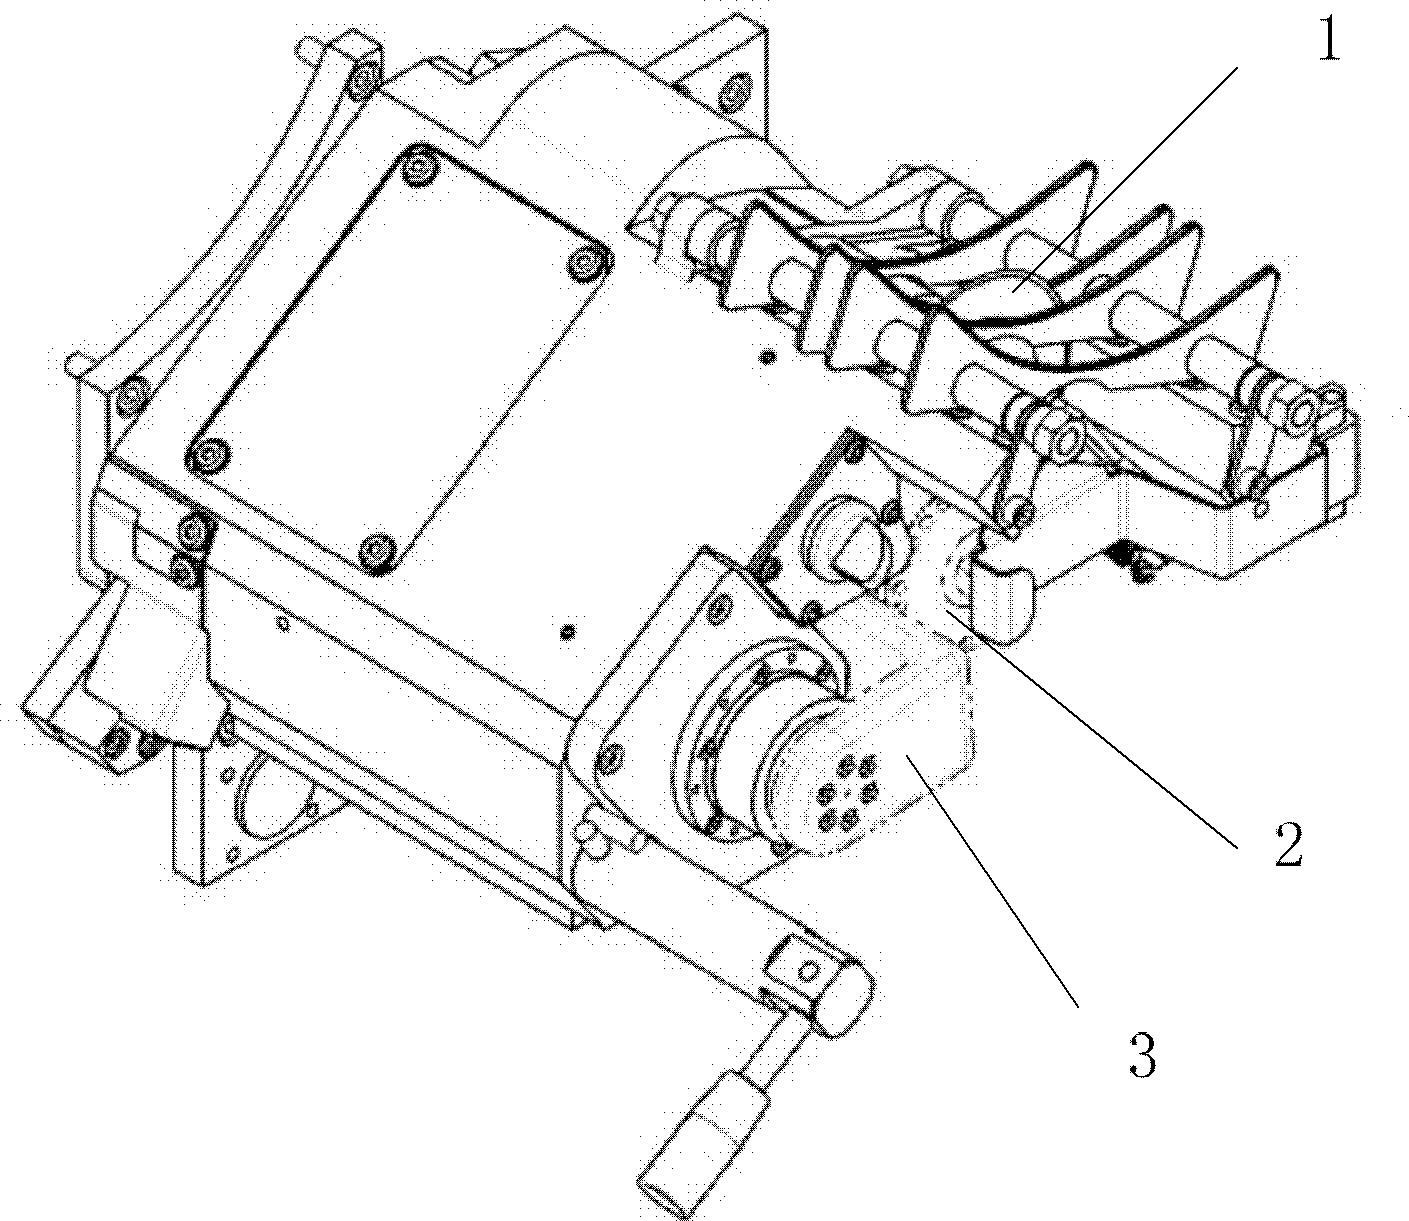 Mounting device for knife grinding wheel of cigarette making machine